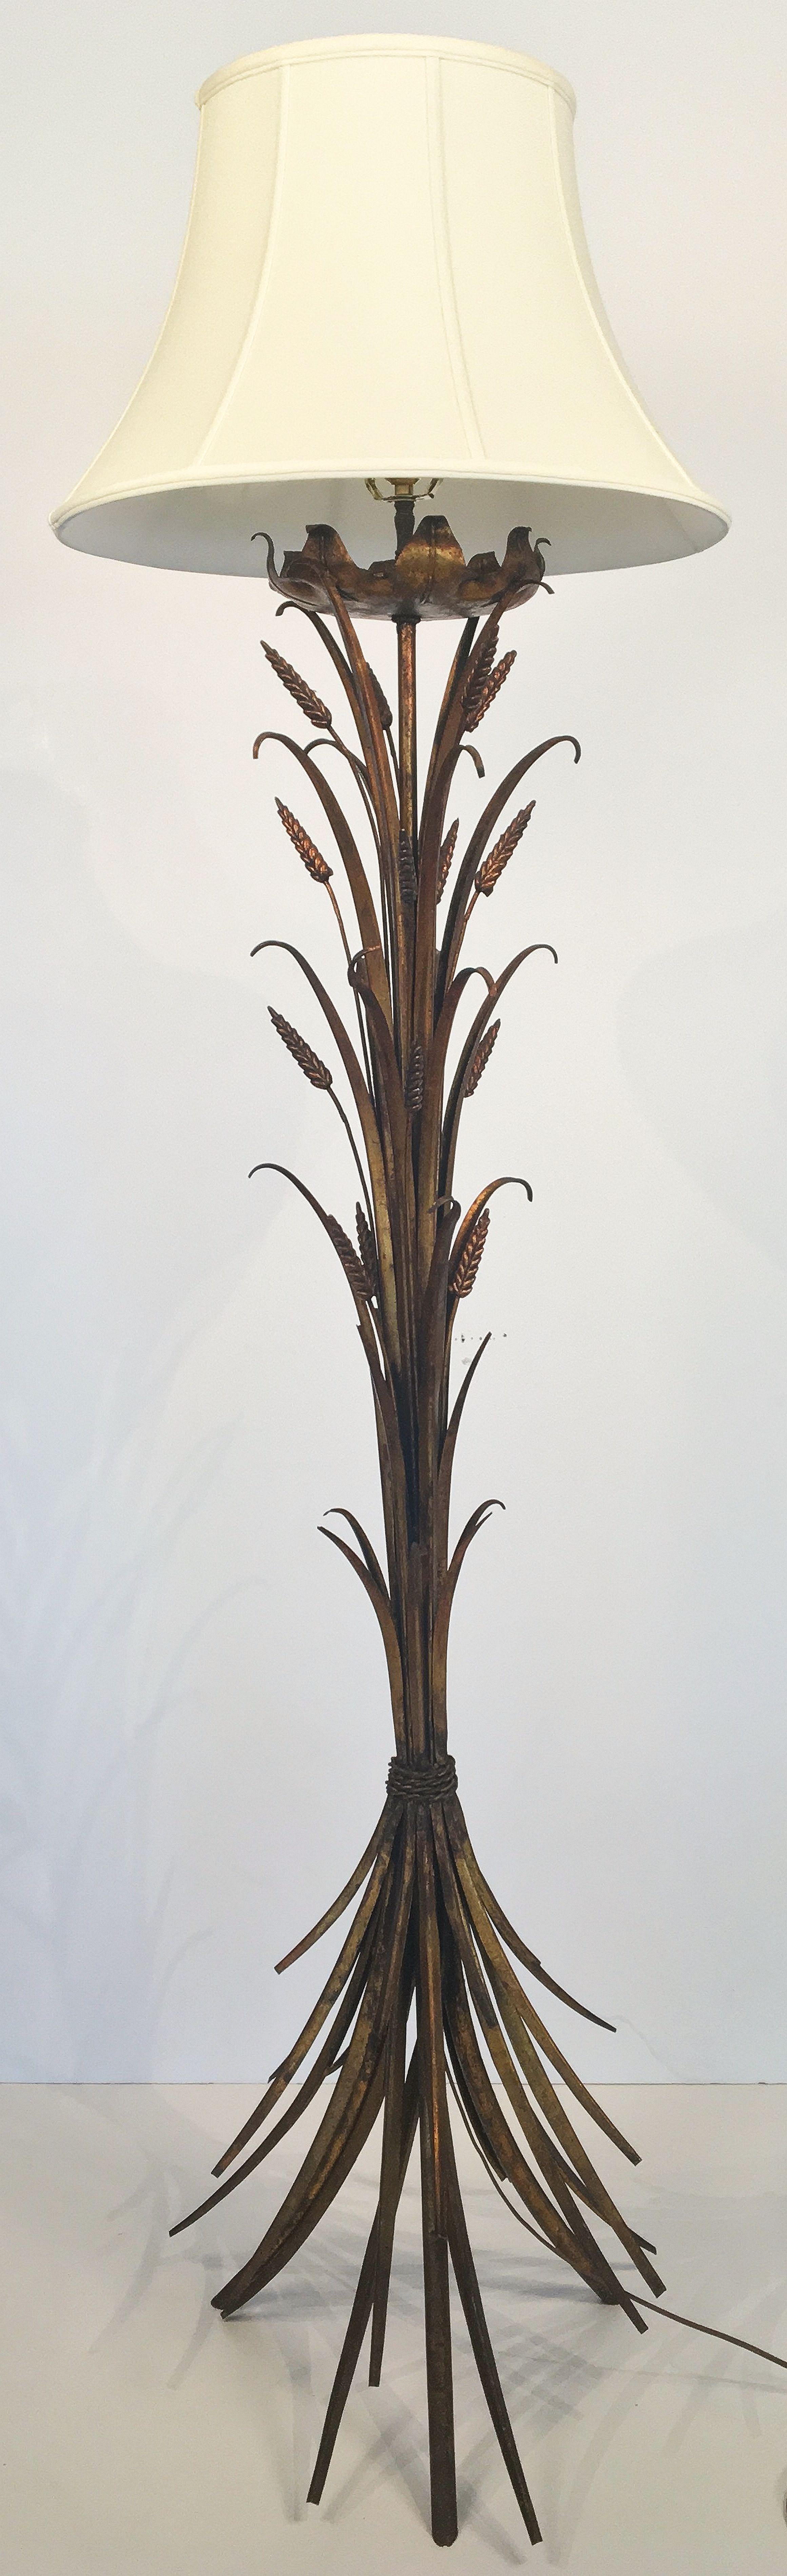 A stylish French floor lamp of gilt metal, with shade, featuring the wheat sheaf (or wheatsheaf) design made famous by Coco Chanel.